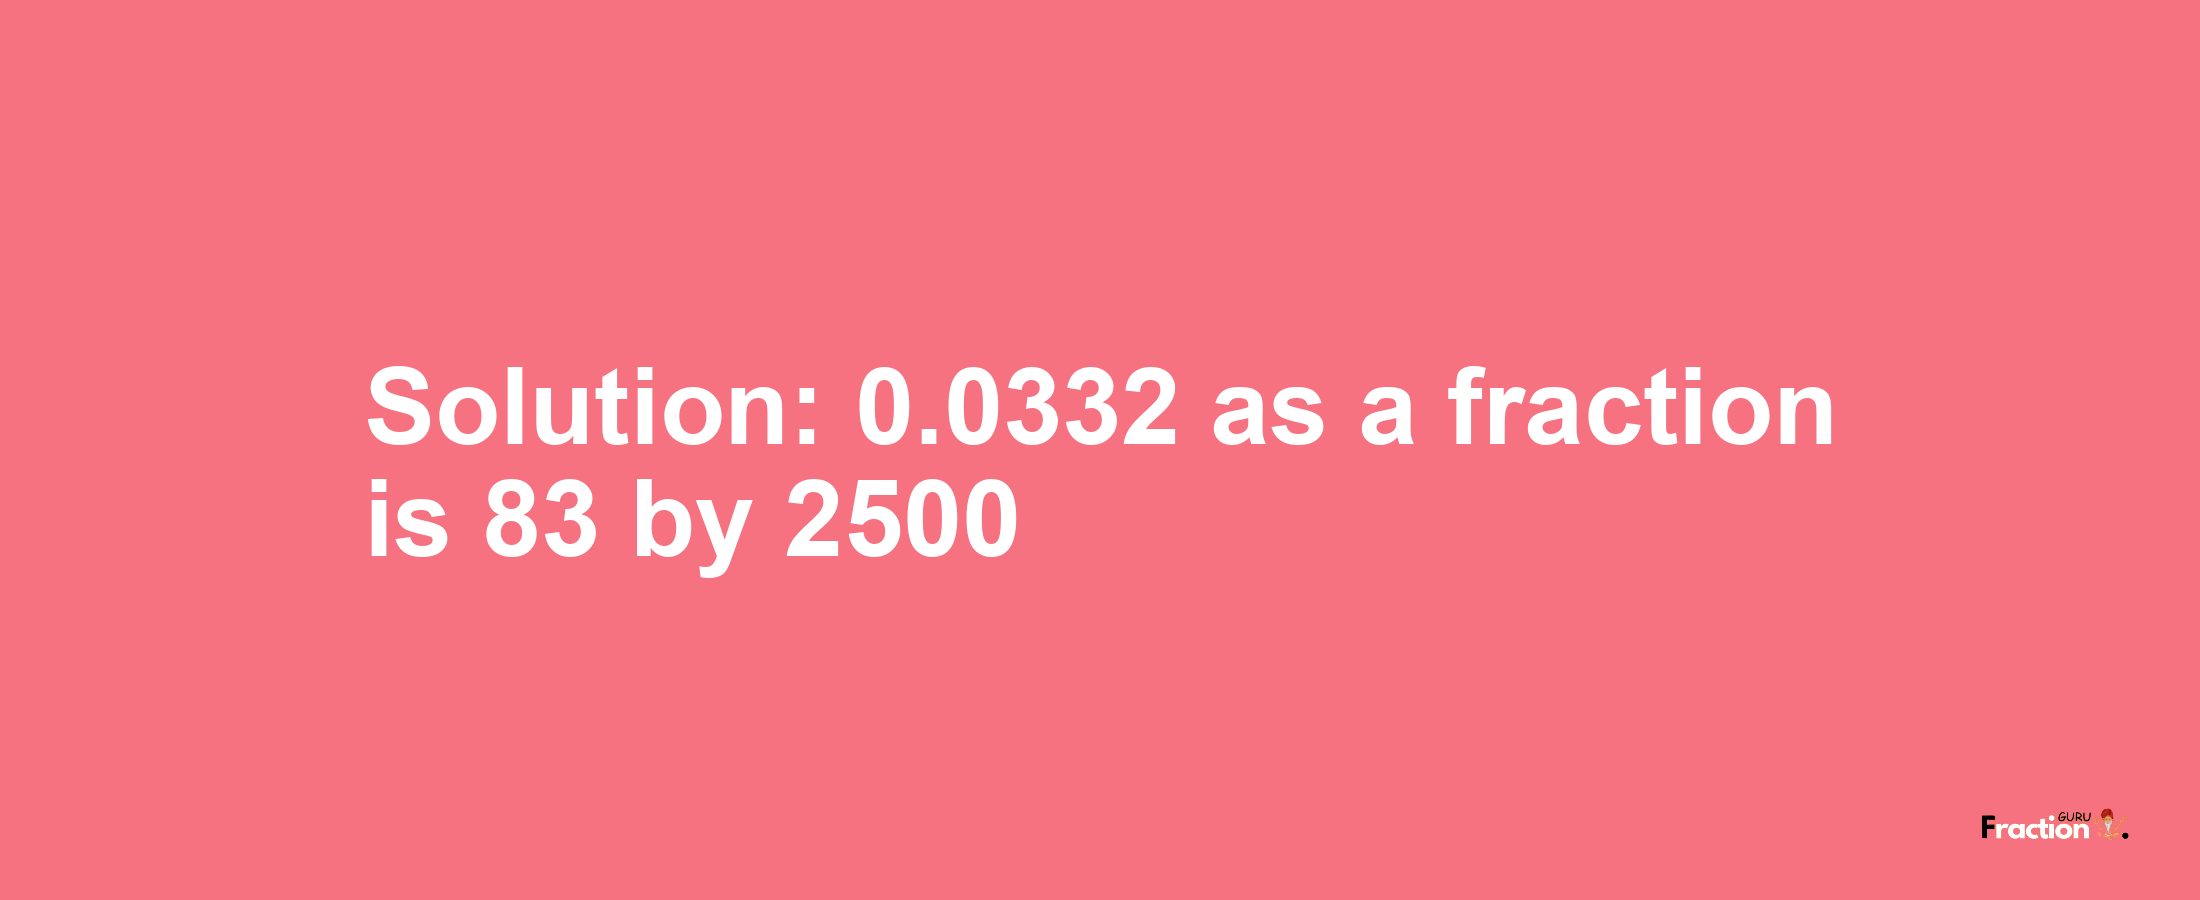 Solution:0.0332 as a fraction is 83/2500